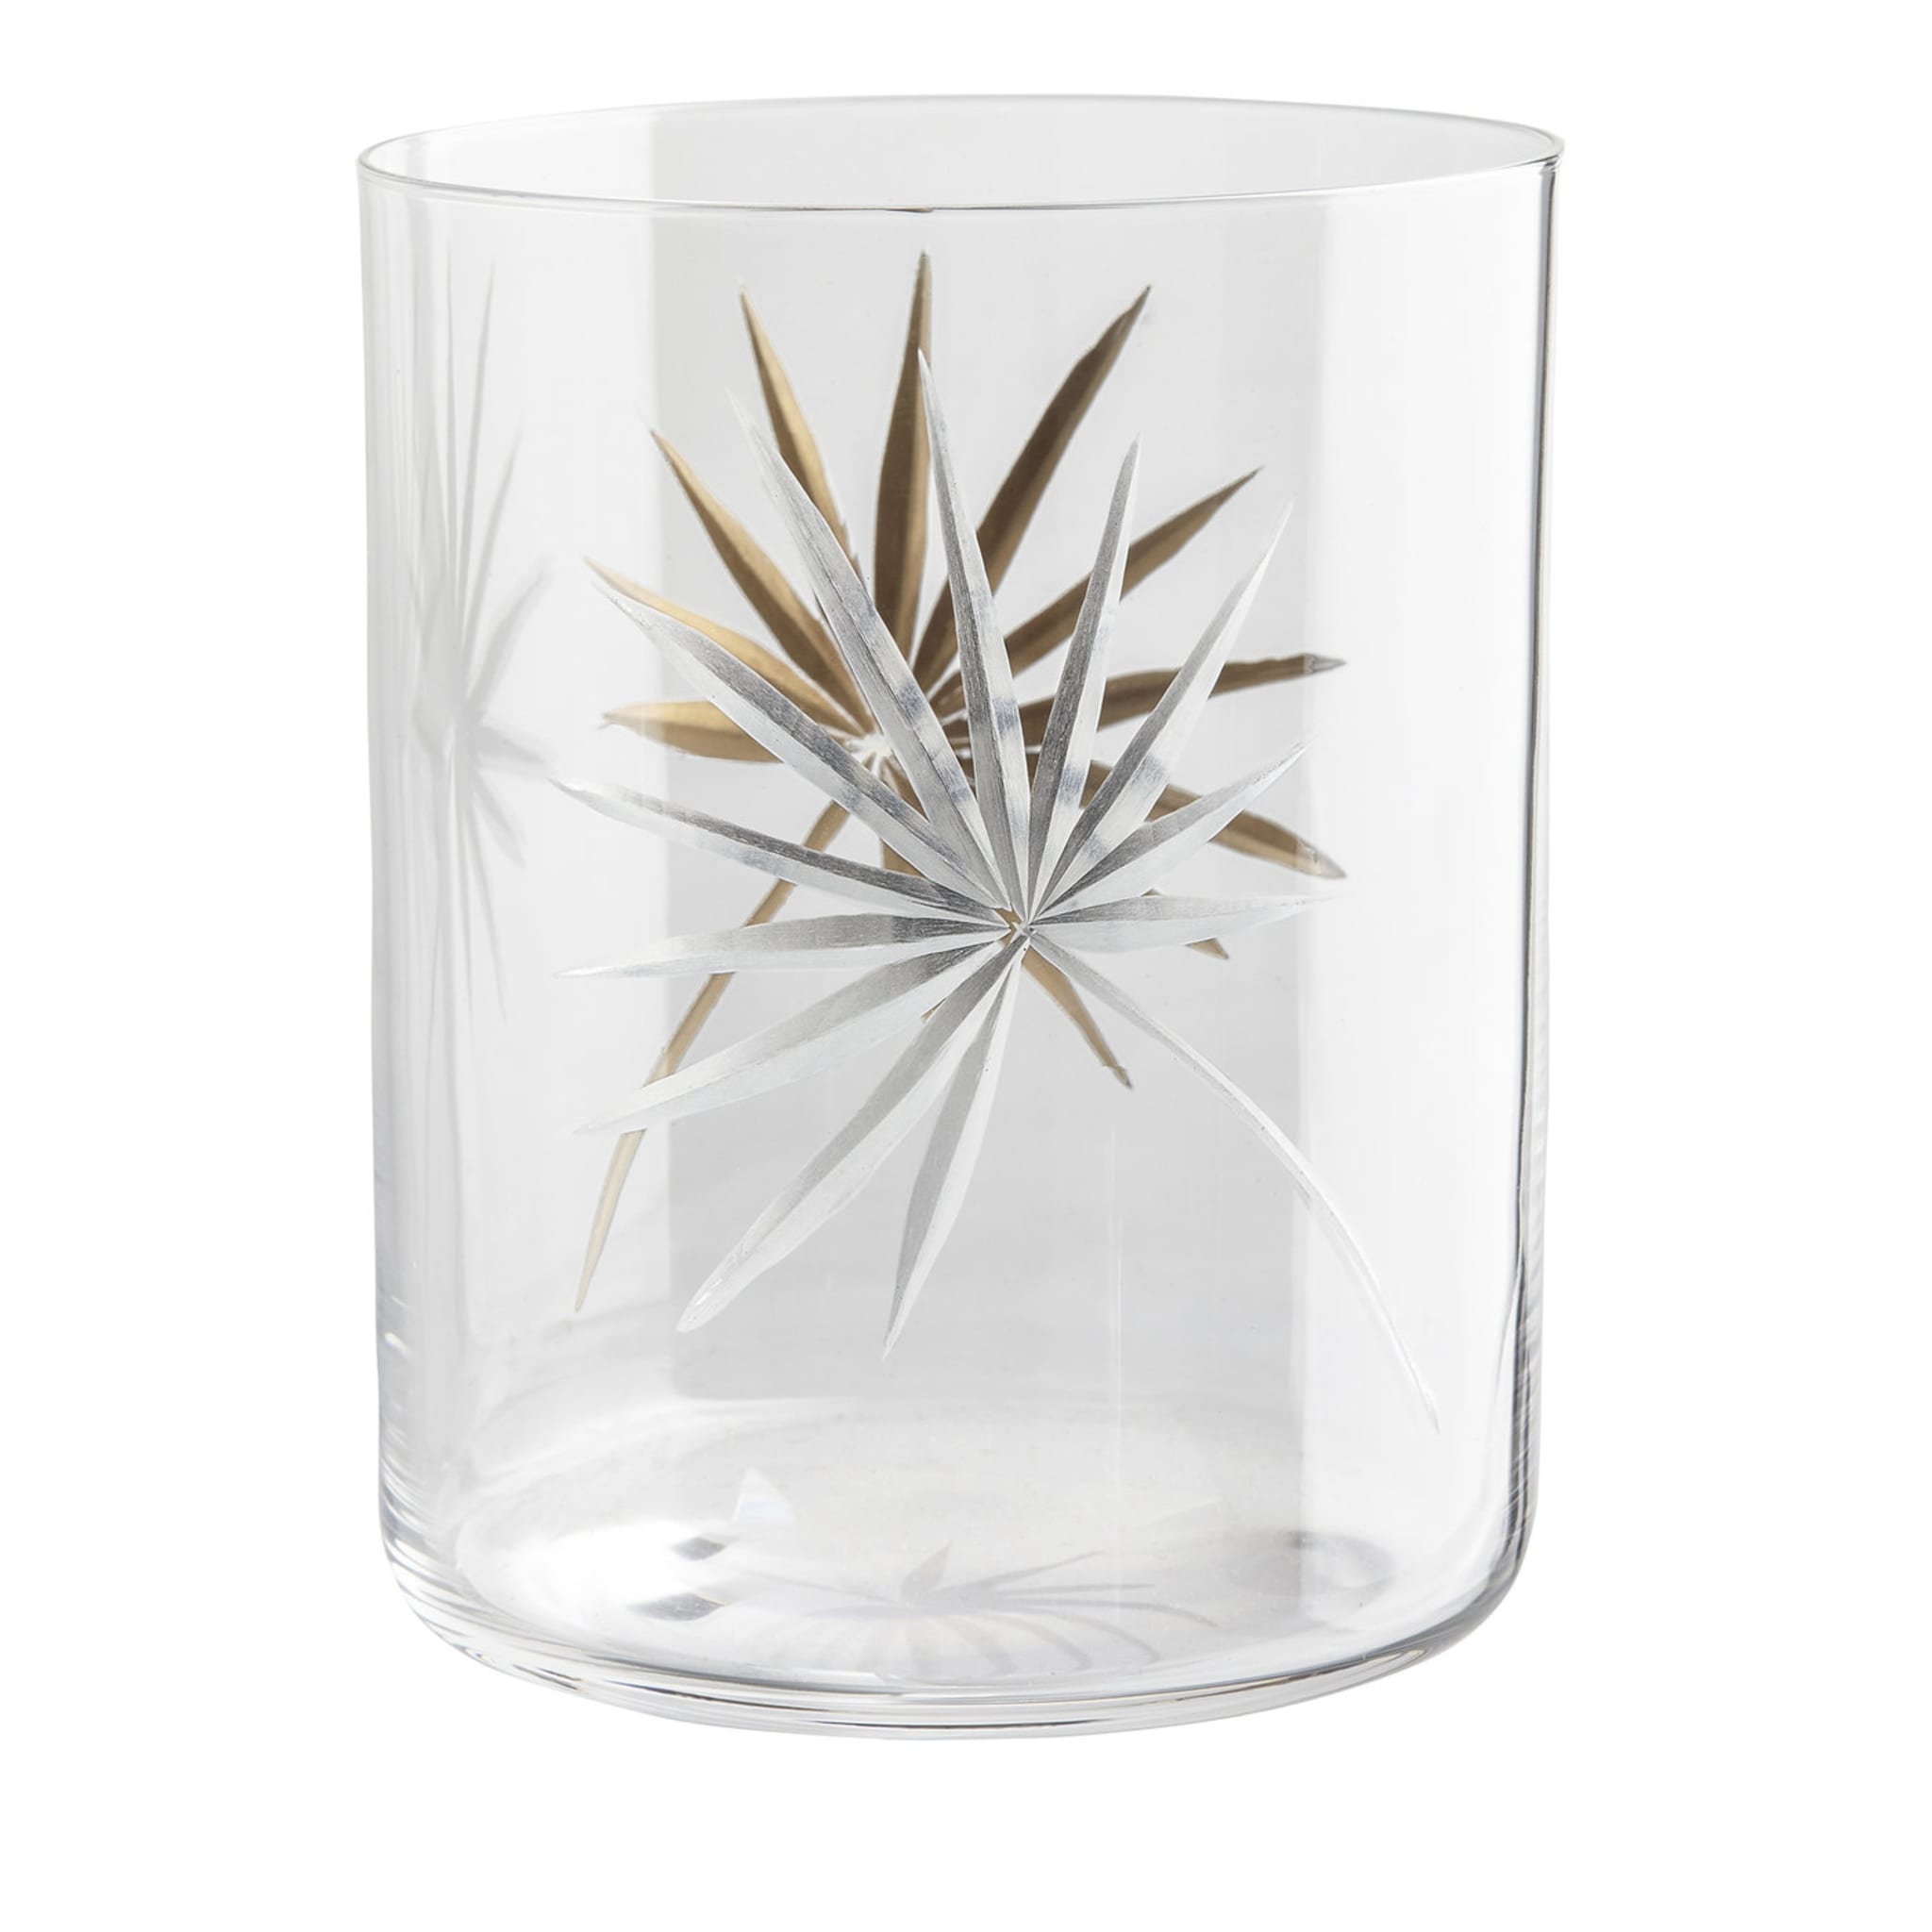 Set of 2 Double Palm Glasses - Alternative view 2